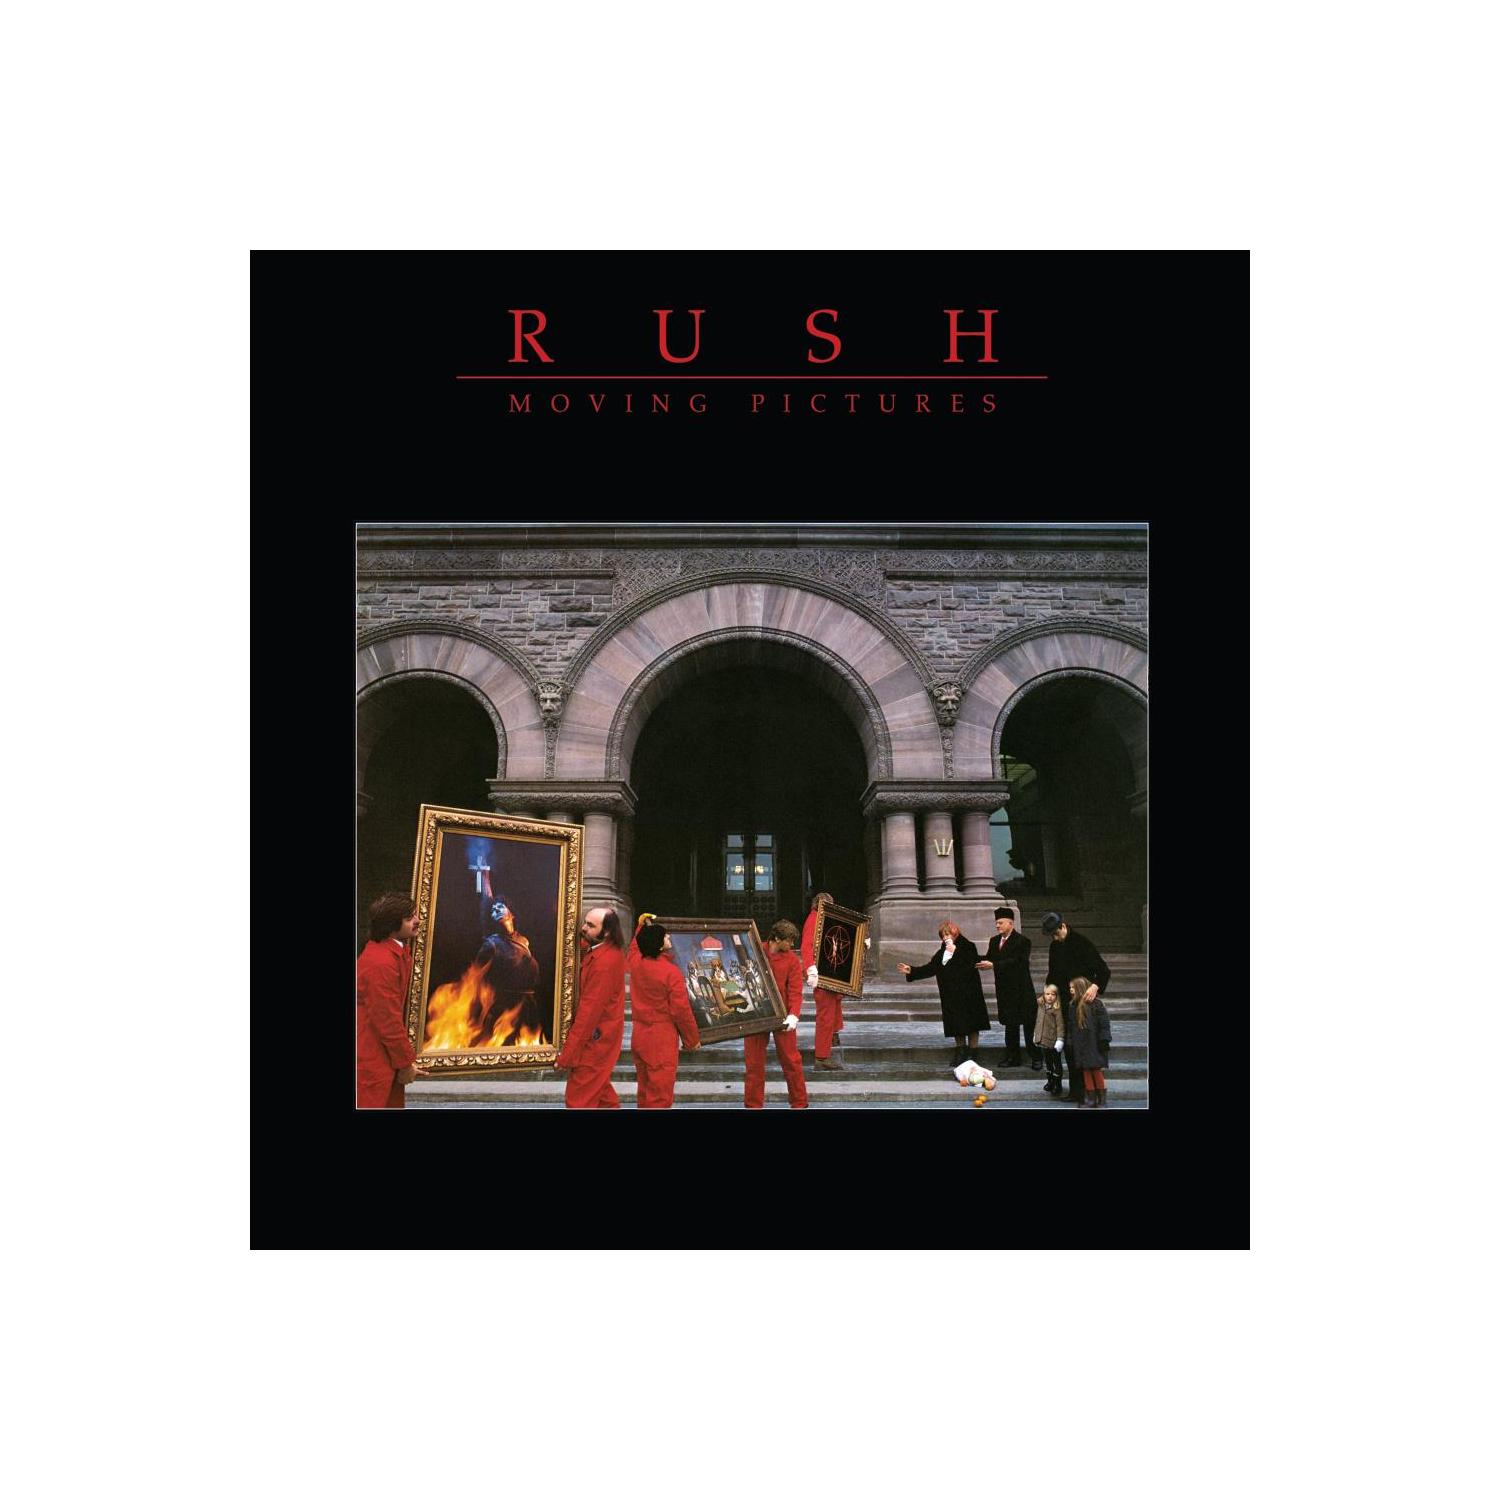 MOVING PICTURES (40TH ANNIVERSARY)  DELU -- RUSH